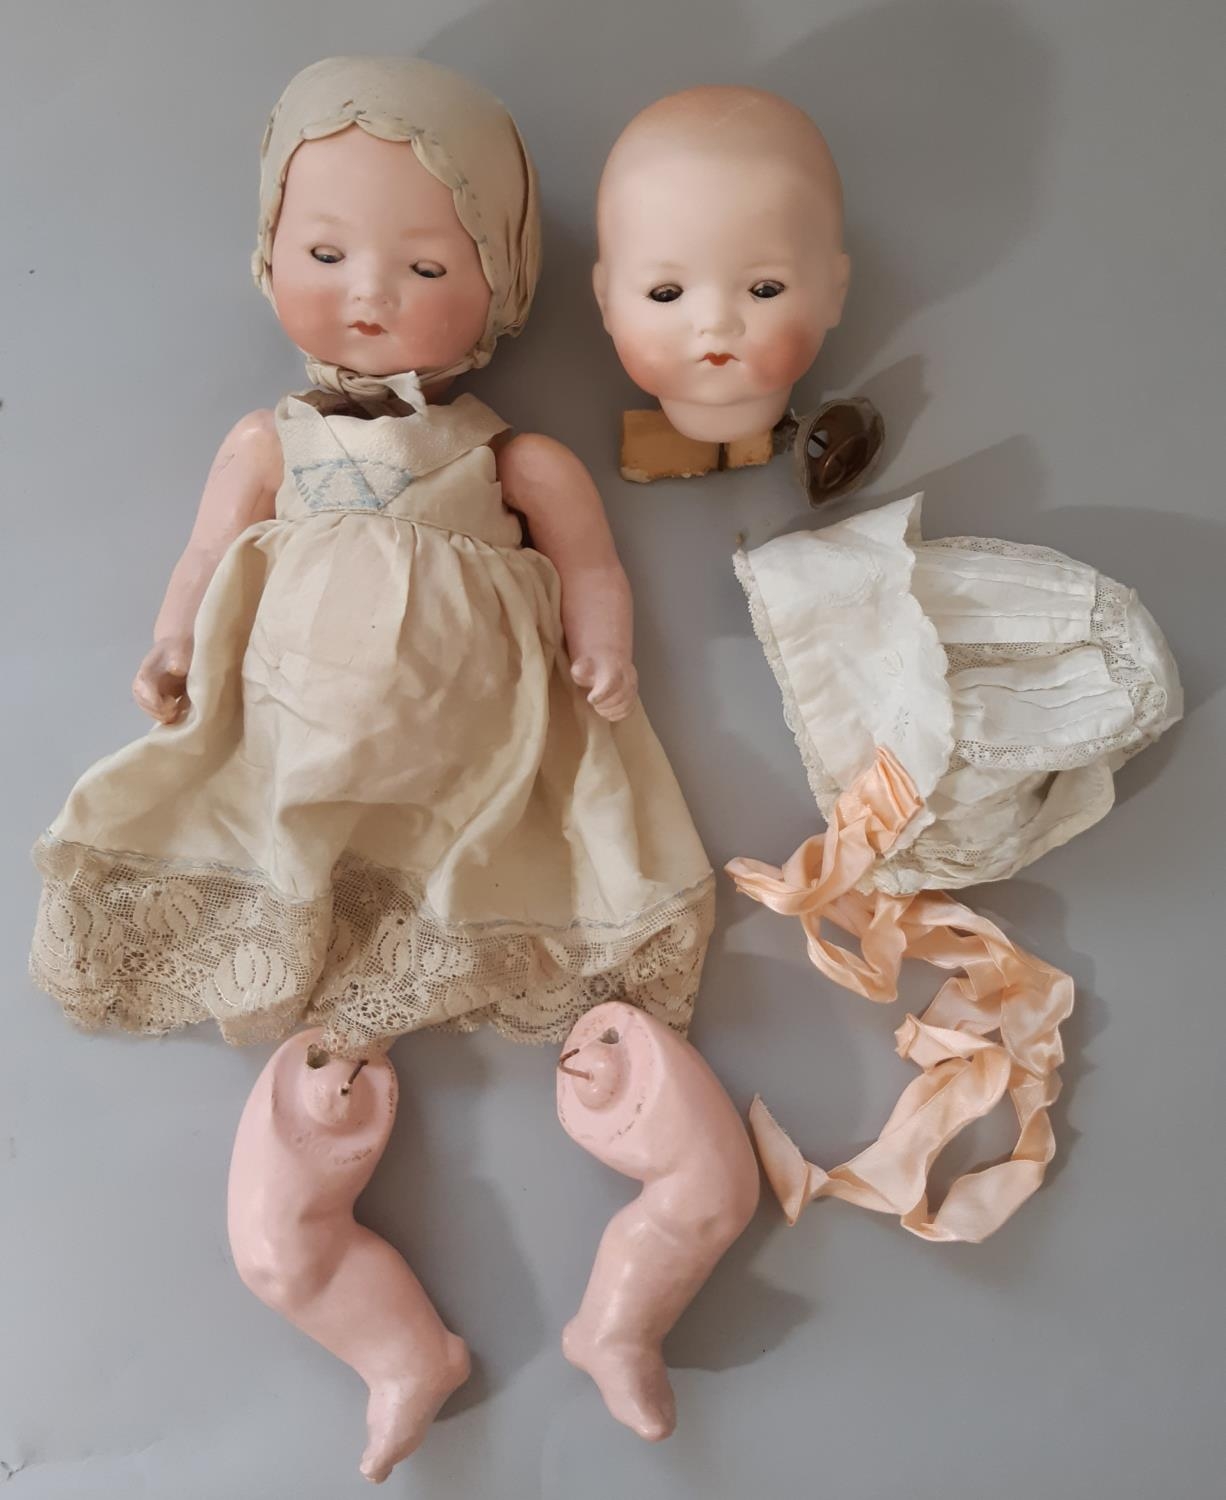 1920's 'My Dream Baby' small bisque head doll by Armand Marseille with composition body in period